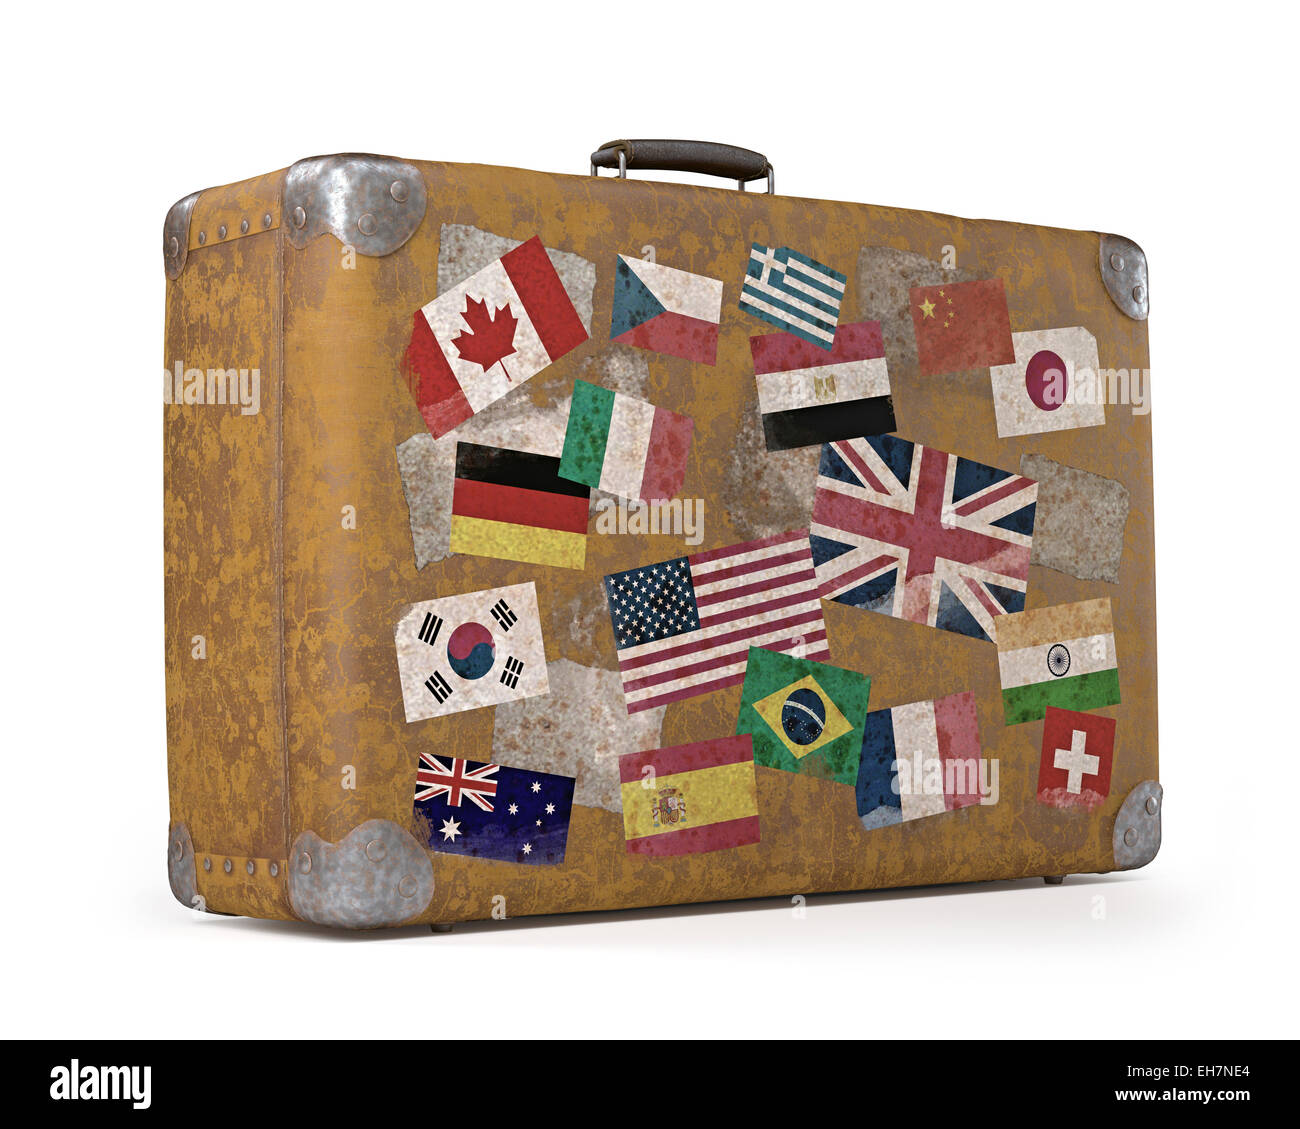 Vintage Suitcase With Stickers 83